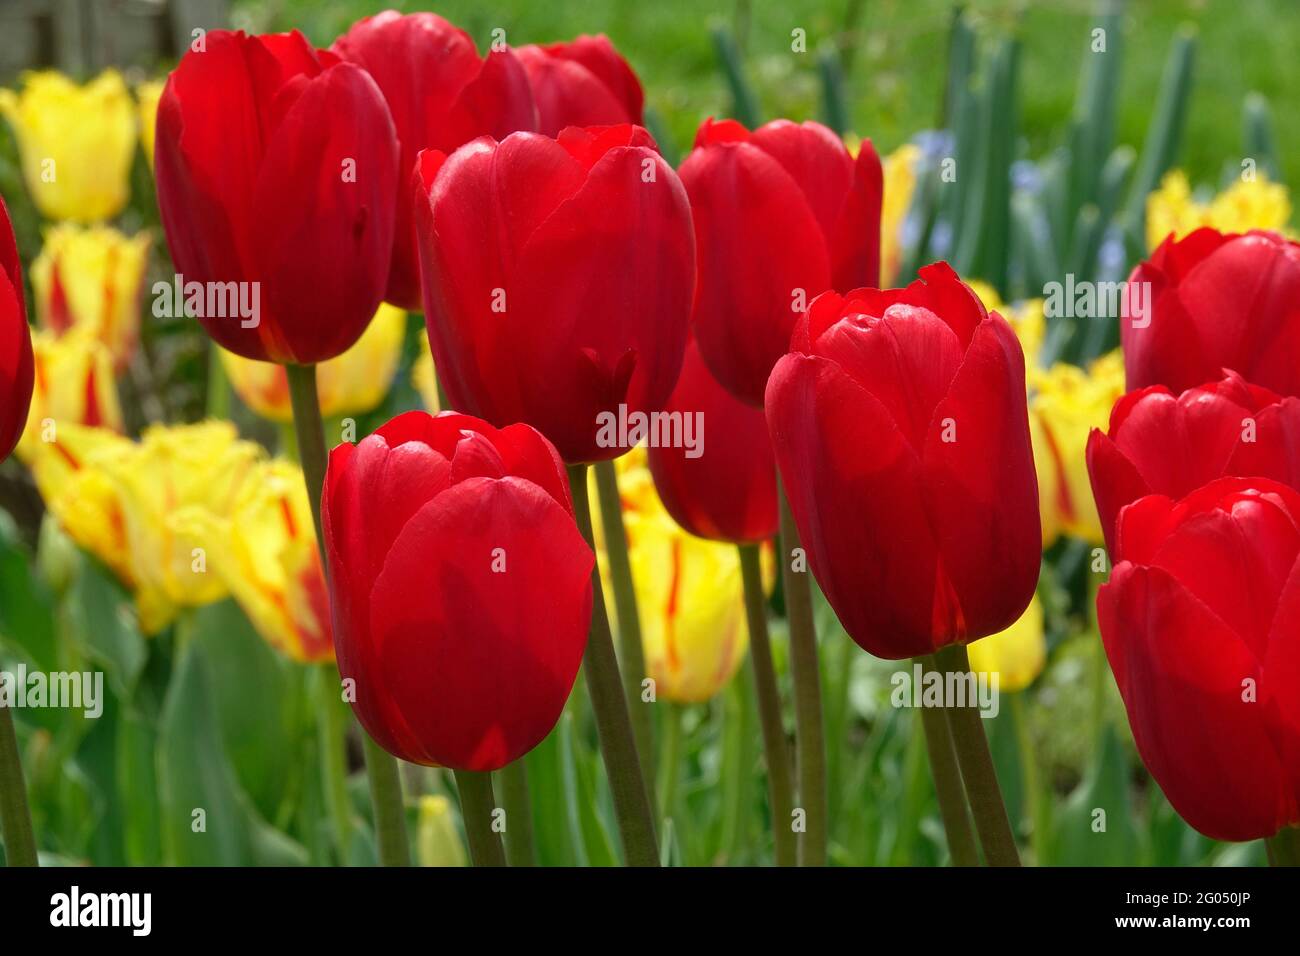 Bright Red and Tall Heartbreaker Tulips In Front of Yellow and Red Striped Fringed Petal Party Clown Tulips Stock Photo